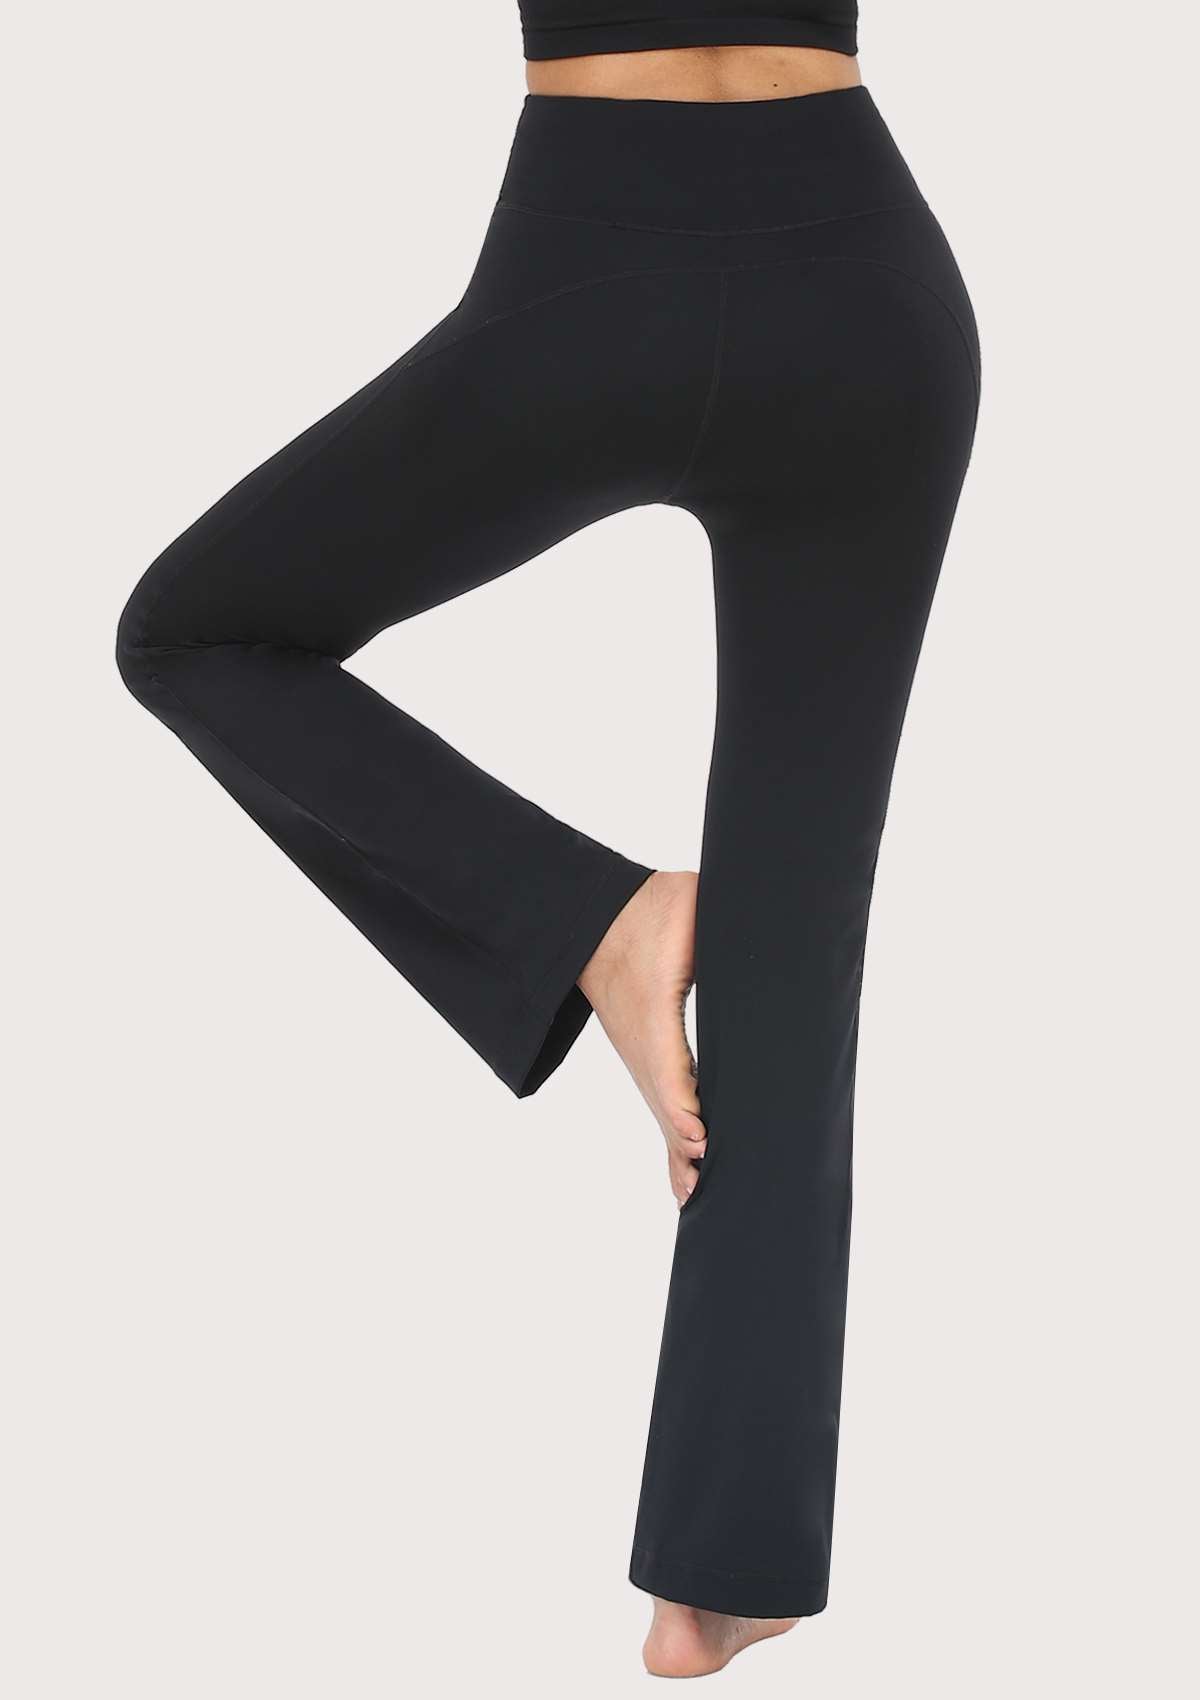 SONGFUL Smooth High Waisted Bootcut Yoga Sports Pants - L / Dark Grey